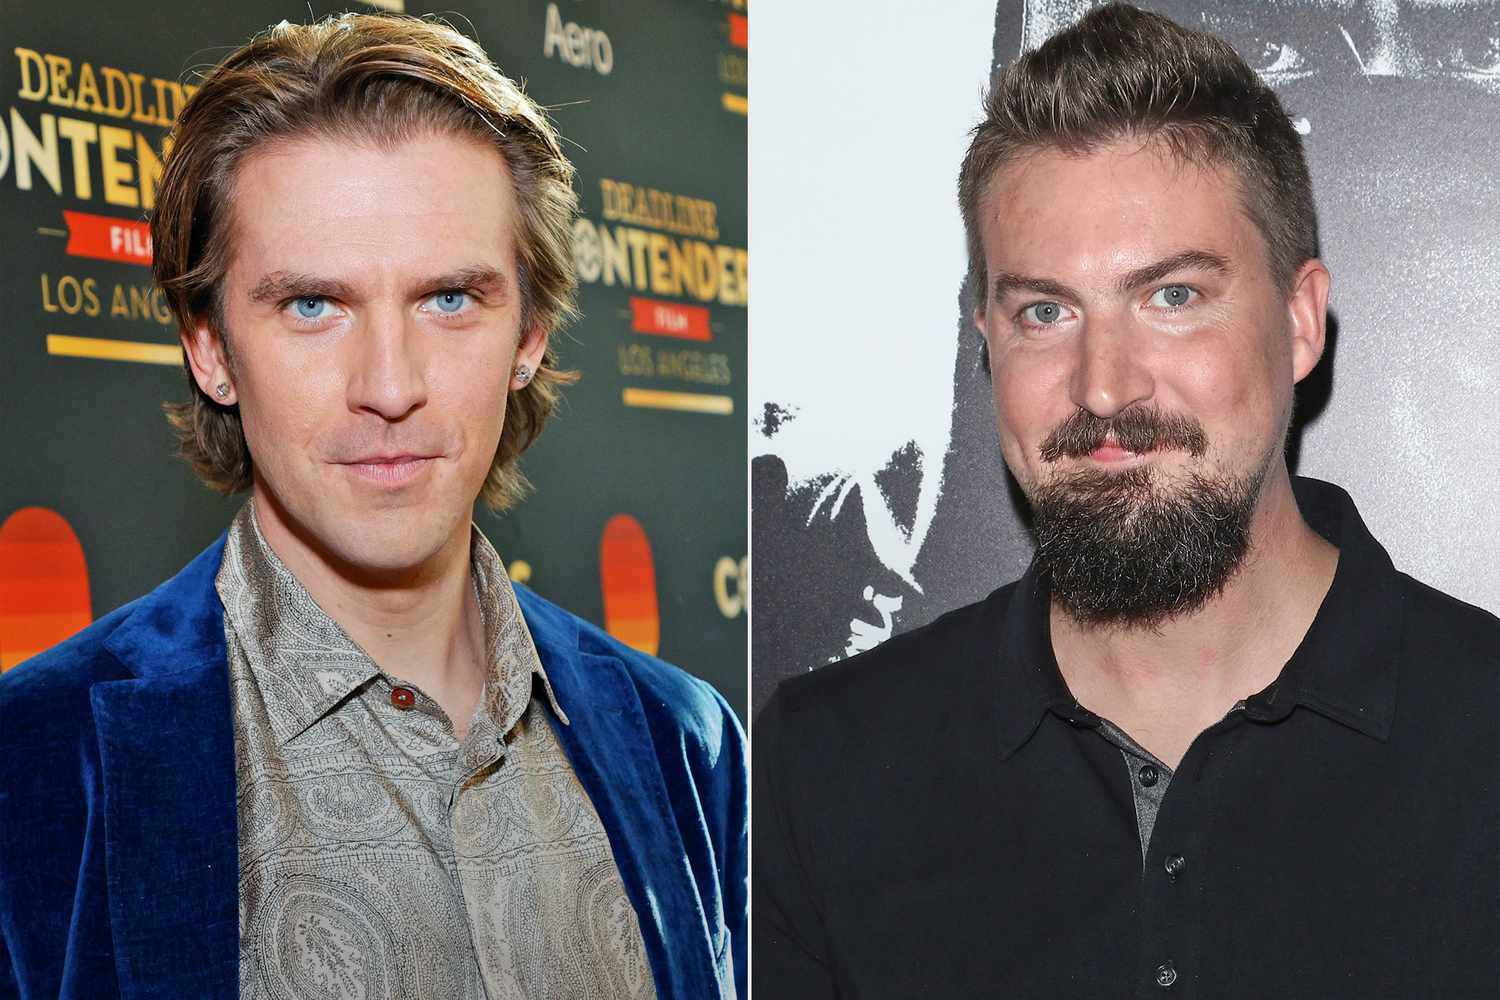 Dan Stevens from Bleecker Street's 'I'm Your Man' attends Deadline's The Contenders Film at DGA Theater Complex on November 14, 2021 in Los Angeles, California. (Photo by Amy Sussman/Getty Images for Deadline); Adam Wingard attends the "Death Note" New York premiere at AMC Loews Lincoln Square 13 theater on August 17, 2017 in New York City. (Photo by Jim Spellman/WireImage)